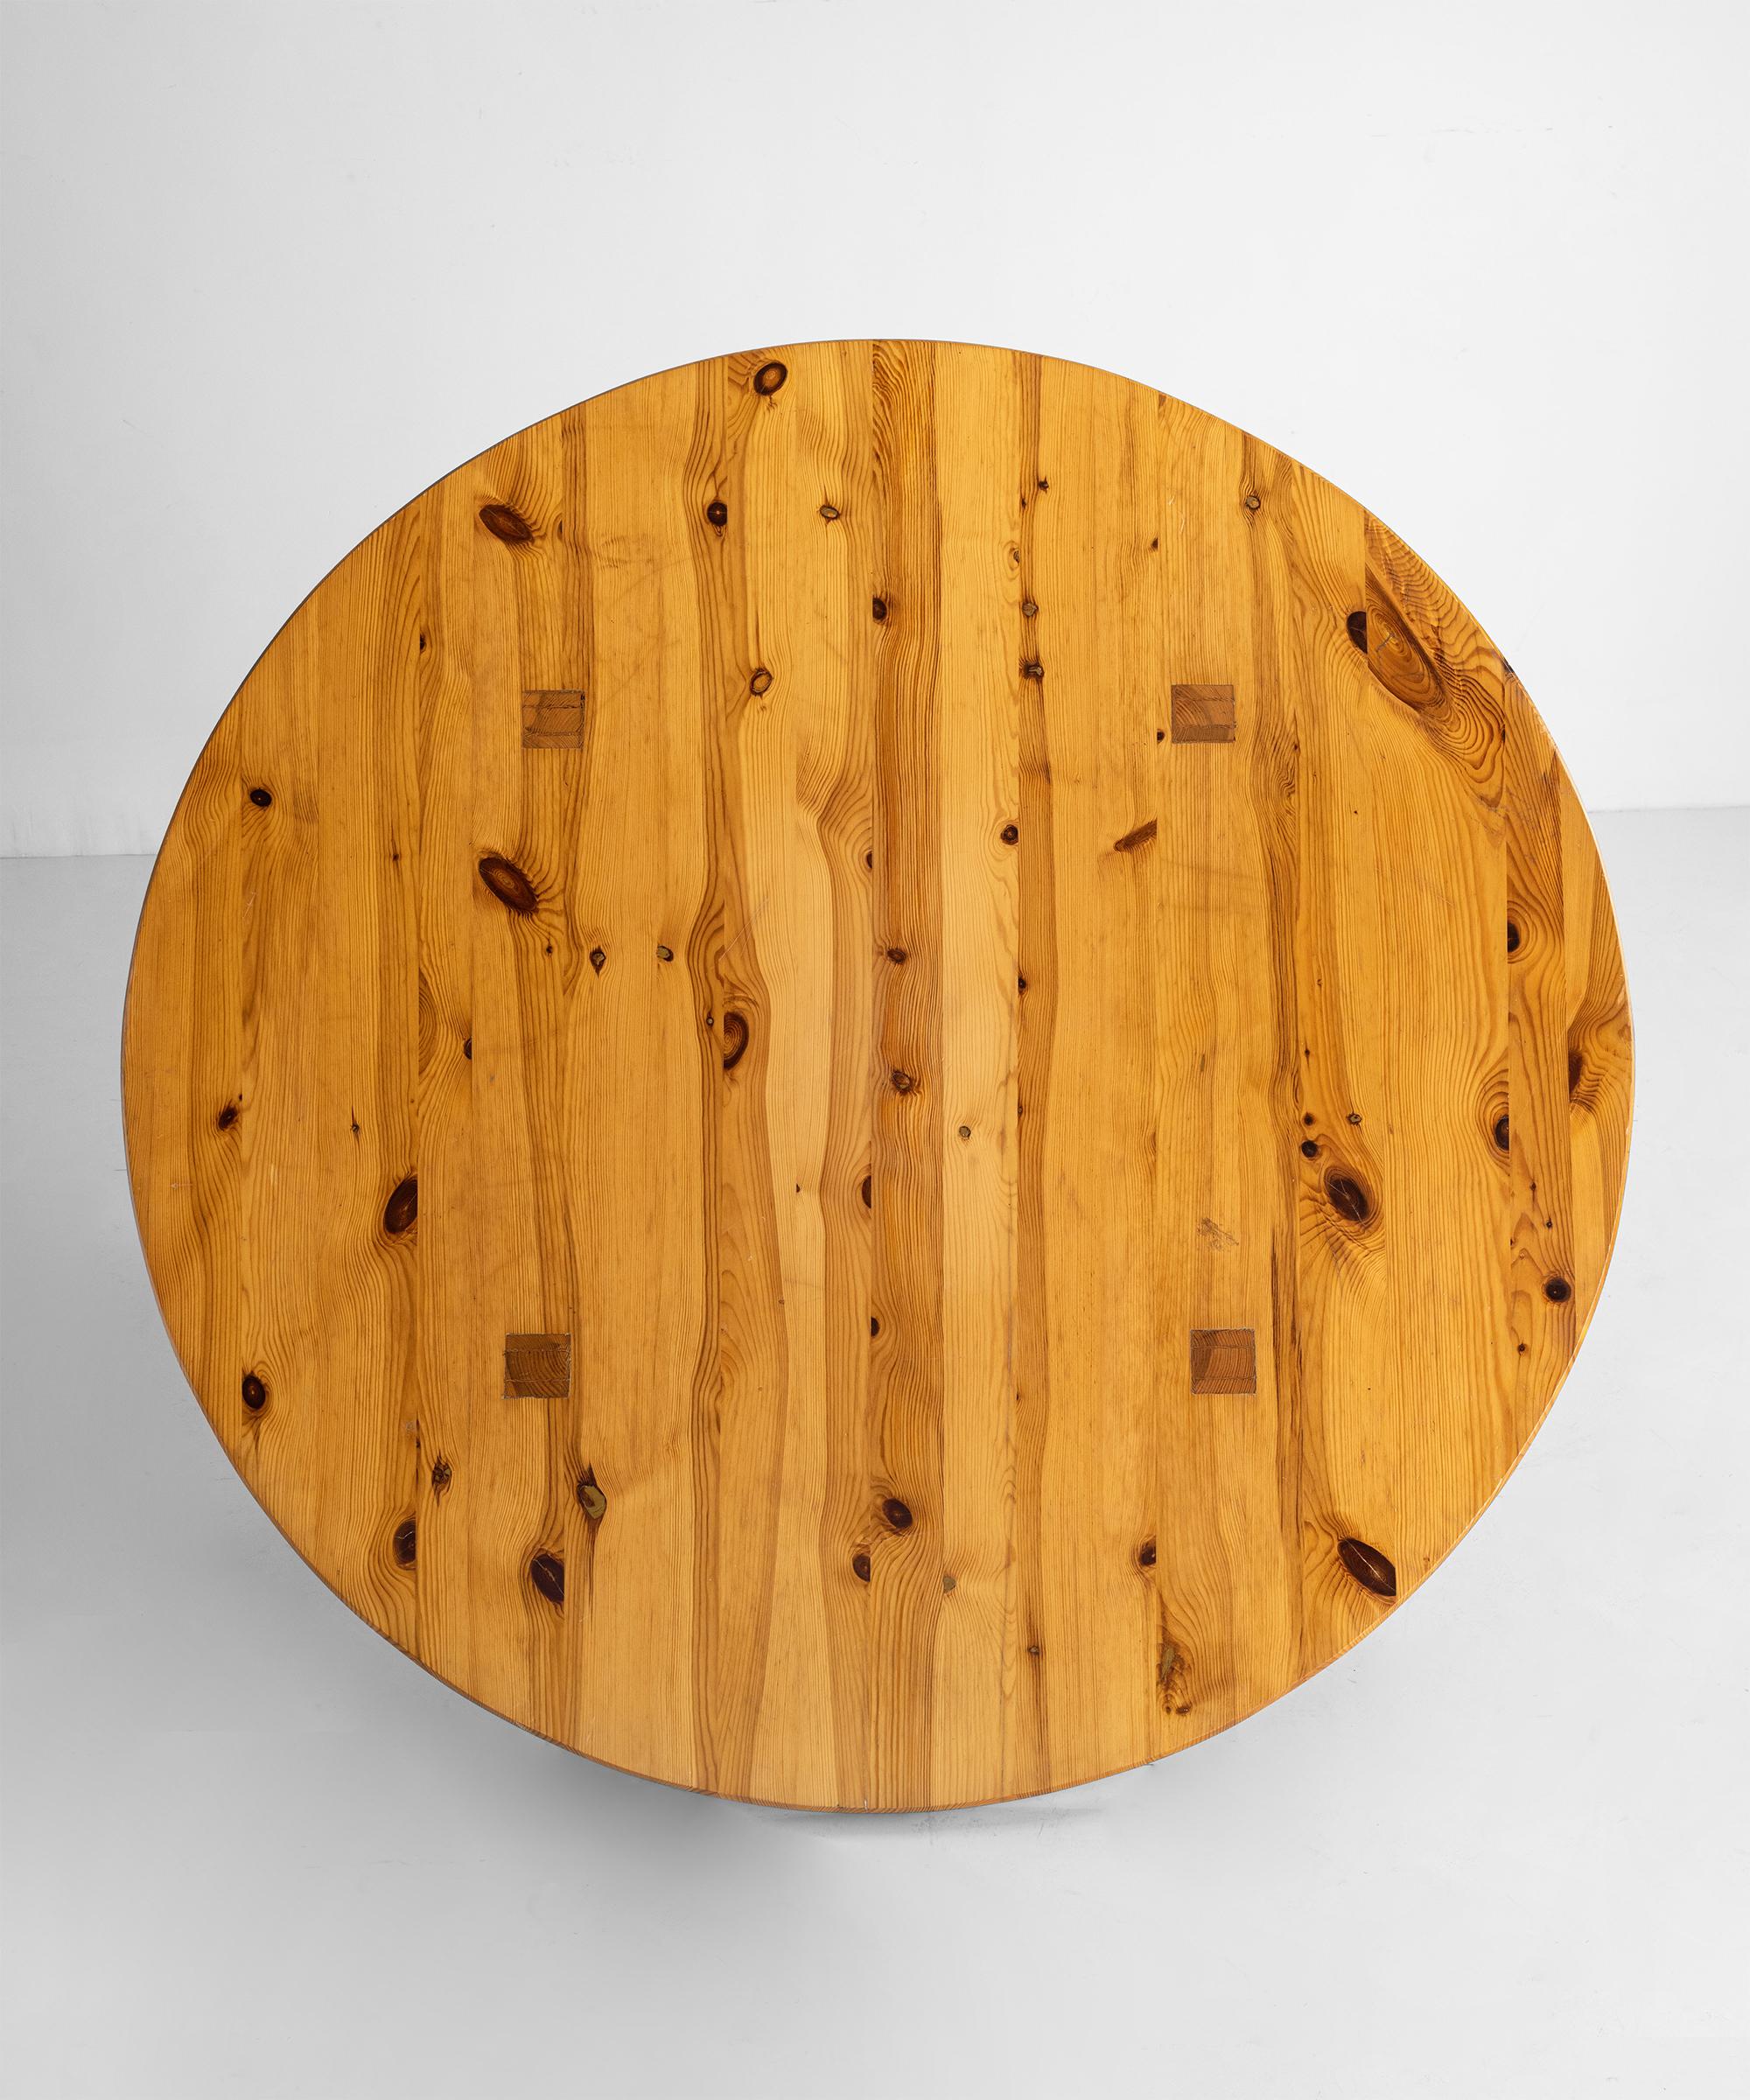 Matbord table by Roland Wilhelmsson

Sweden, Circa 1970

Circular Dining table constructed in Pine.

Measures: 71”diameter x 28.25” height.